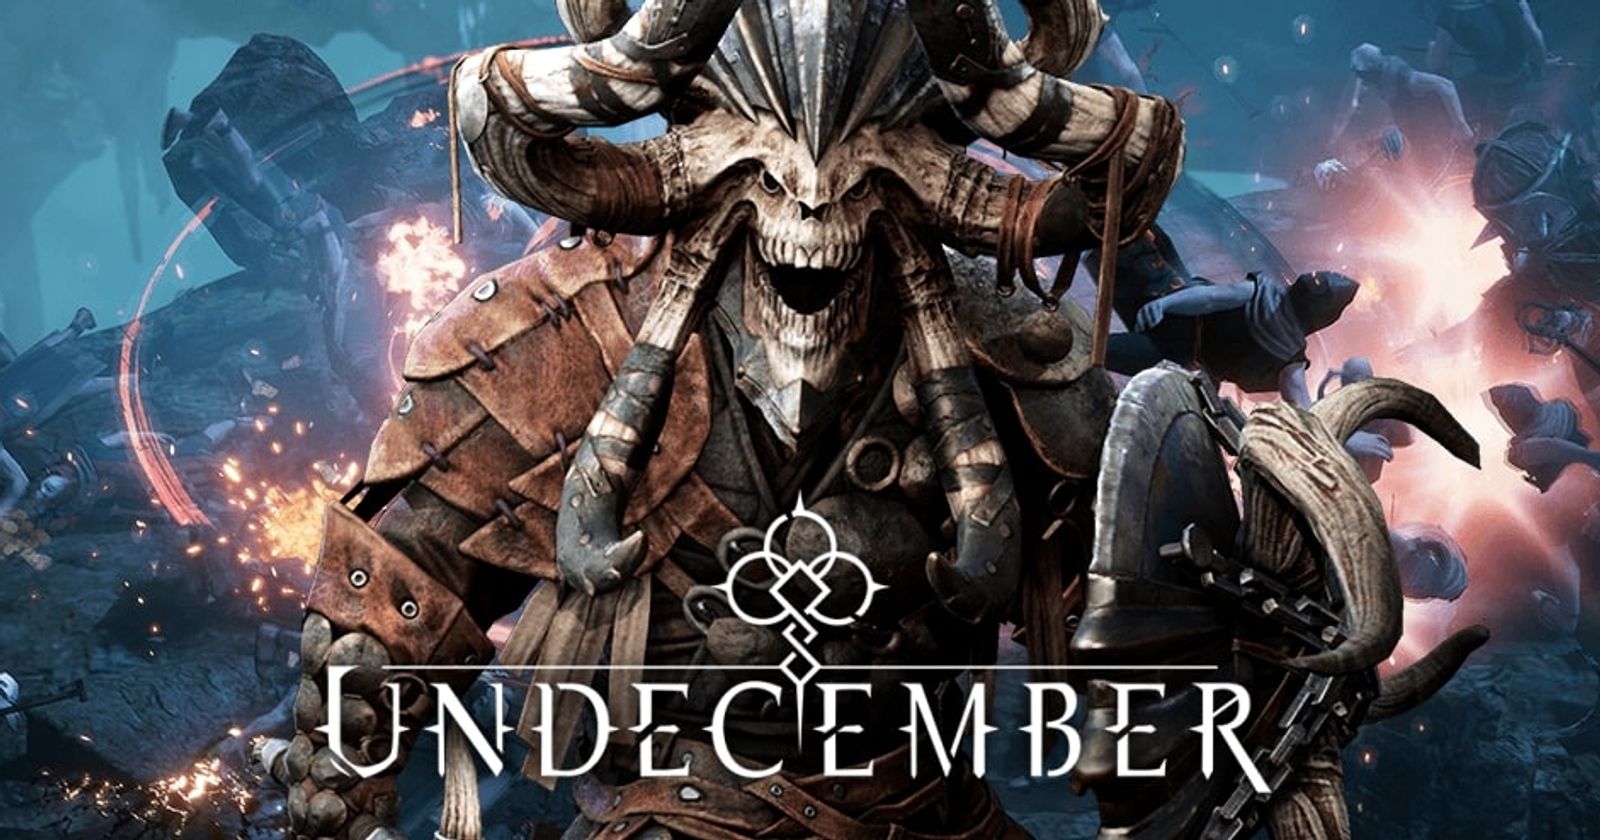 Undecember GAMEPLAY PC - Combat, Weapons and Main